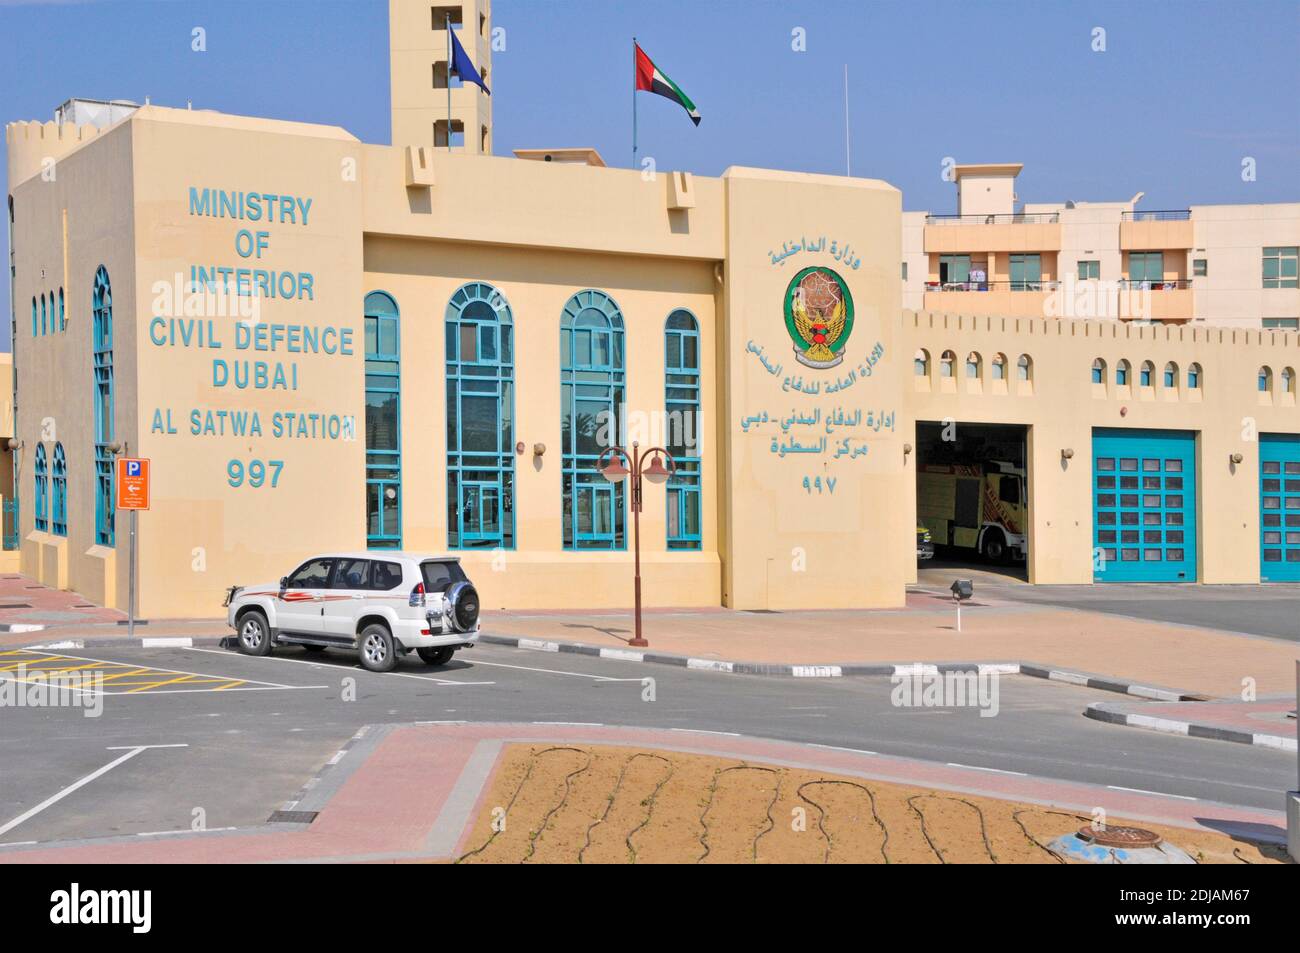 Facade of Dubai Ministry of Interior Civil Defence Al Satwa Fire Staion 997 building with open shutter and fire engine truck United Arab Emirates UAE Stock Photo